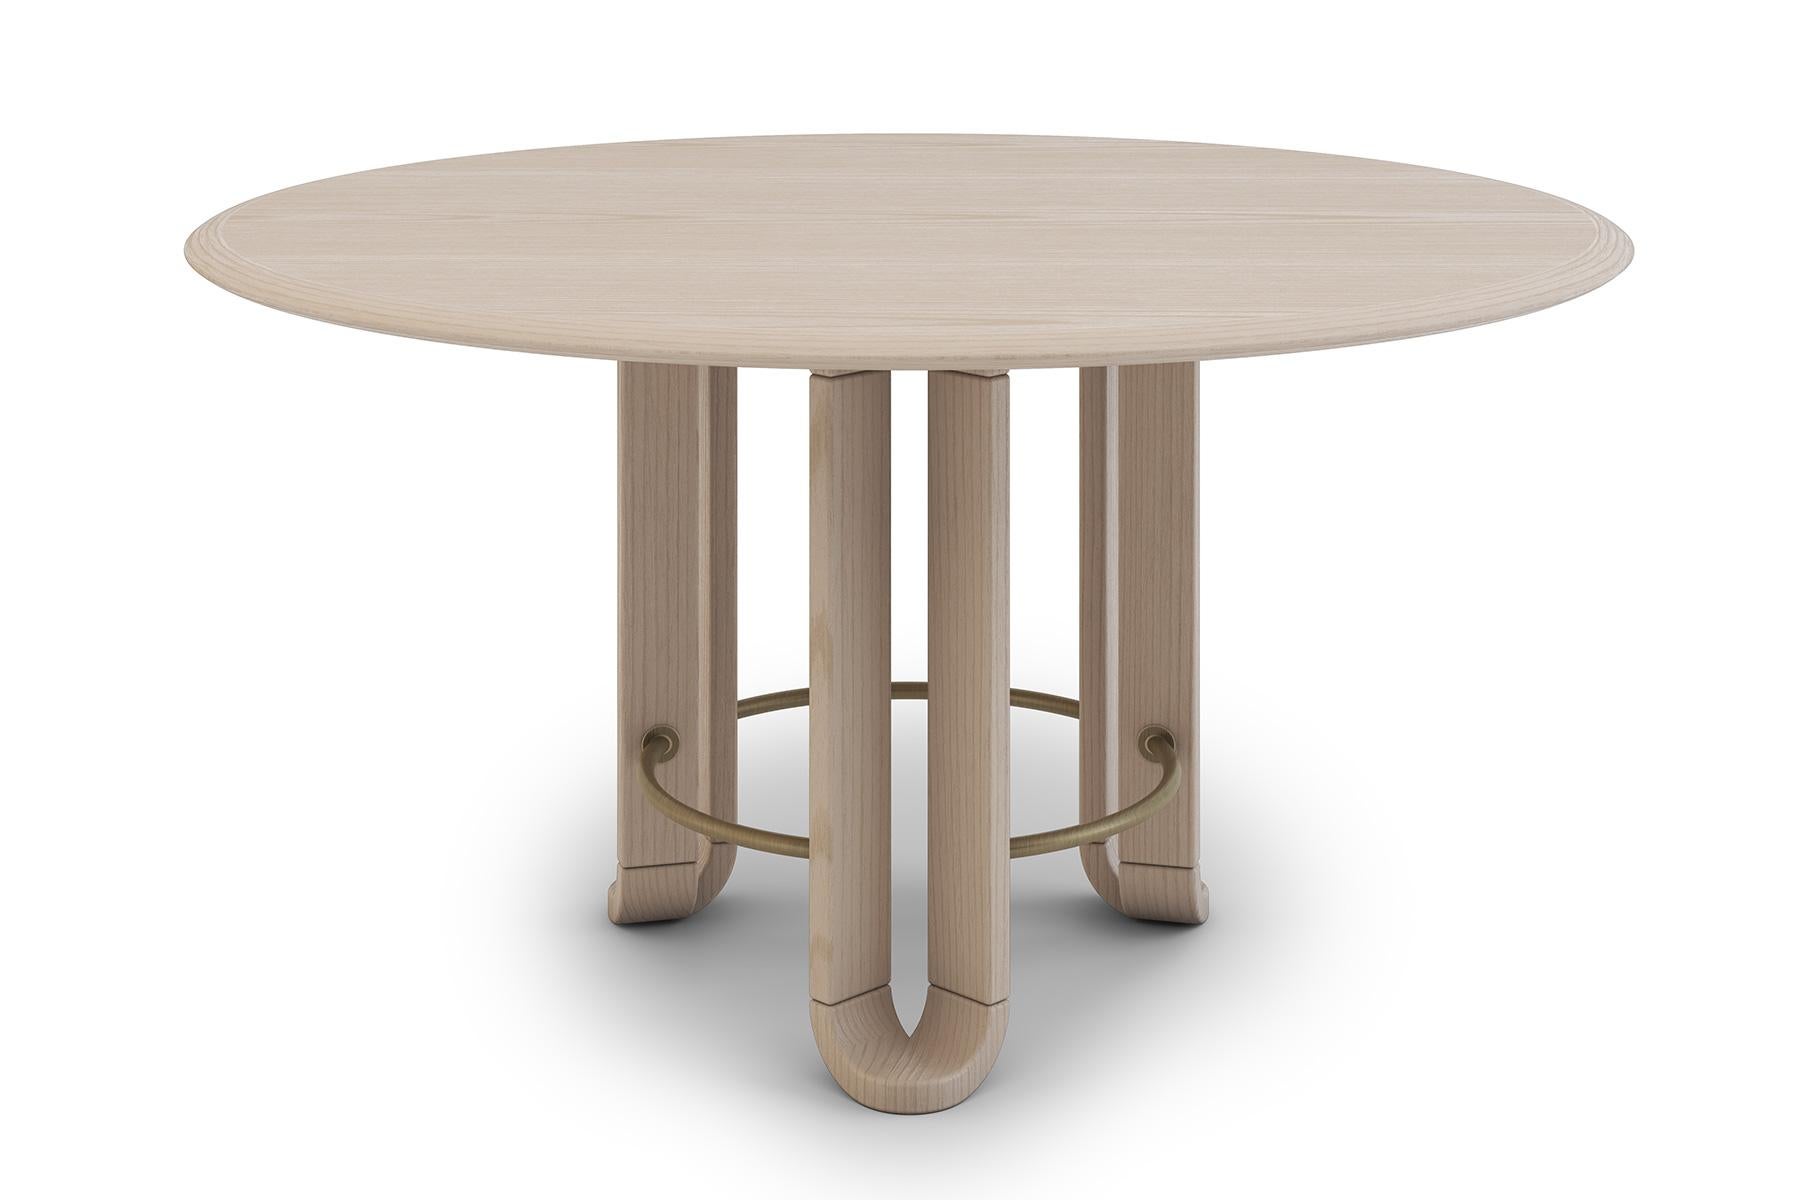 Unique round Yaprak dining table by Ekin Varon
Dimensions: D 140 x 75 H
Materials: Walnut, maple, oak
Custom materials, sizing and finishes available as item is made to order.

Ekin Varon is the founder and creative director of Ekin Varon